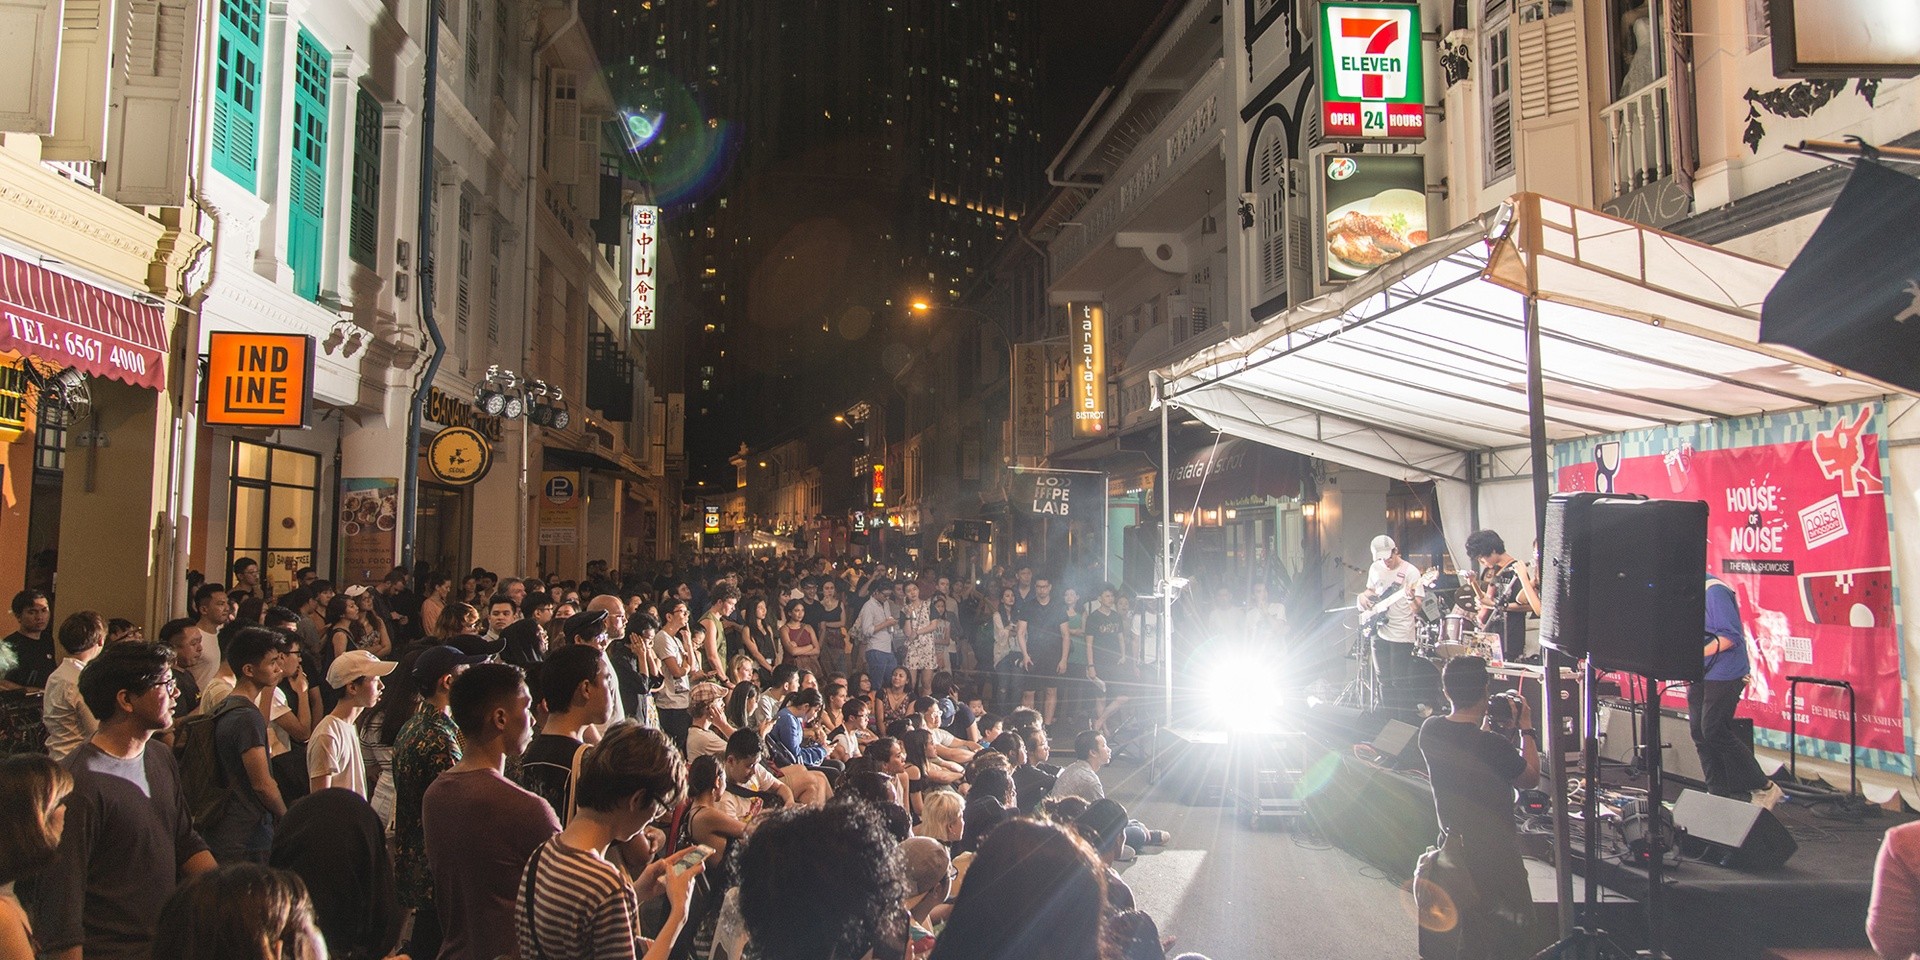 Urban Ventures will take over the streets of Keong Saik with live music, beer yoga, and more